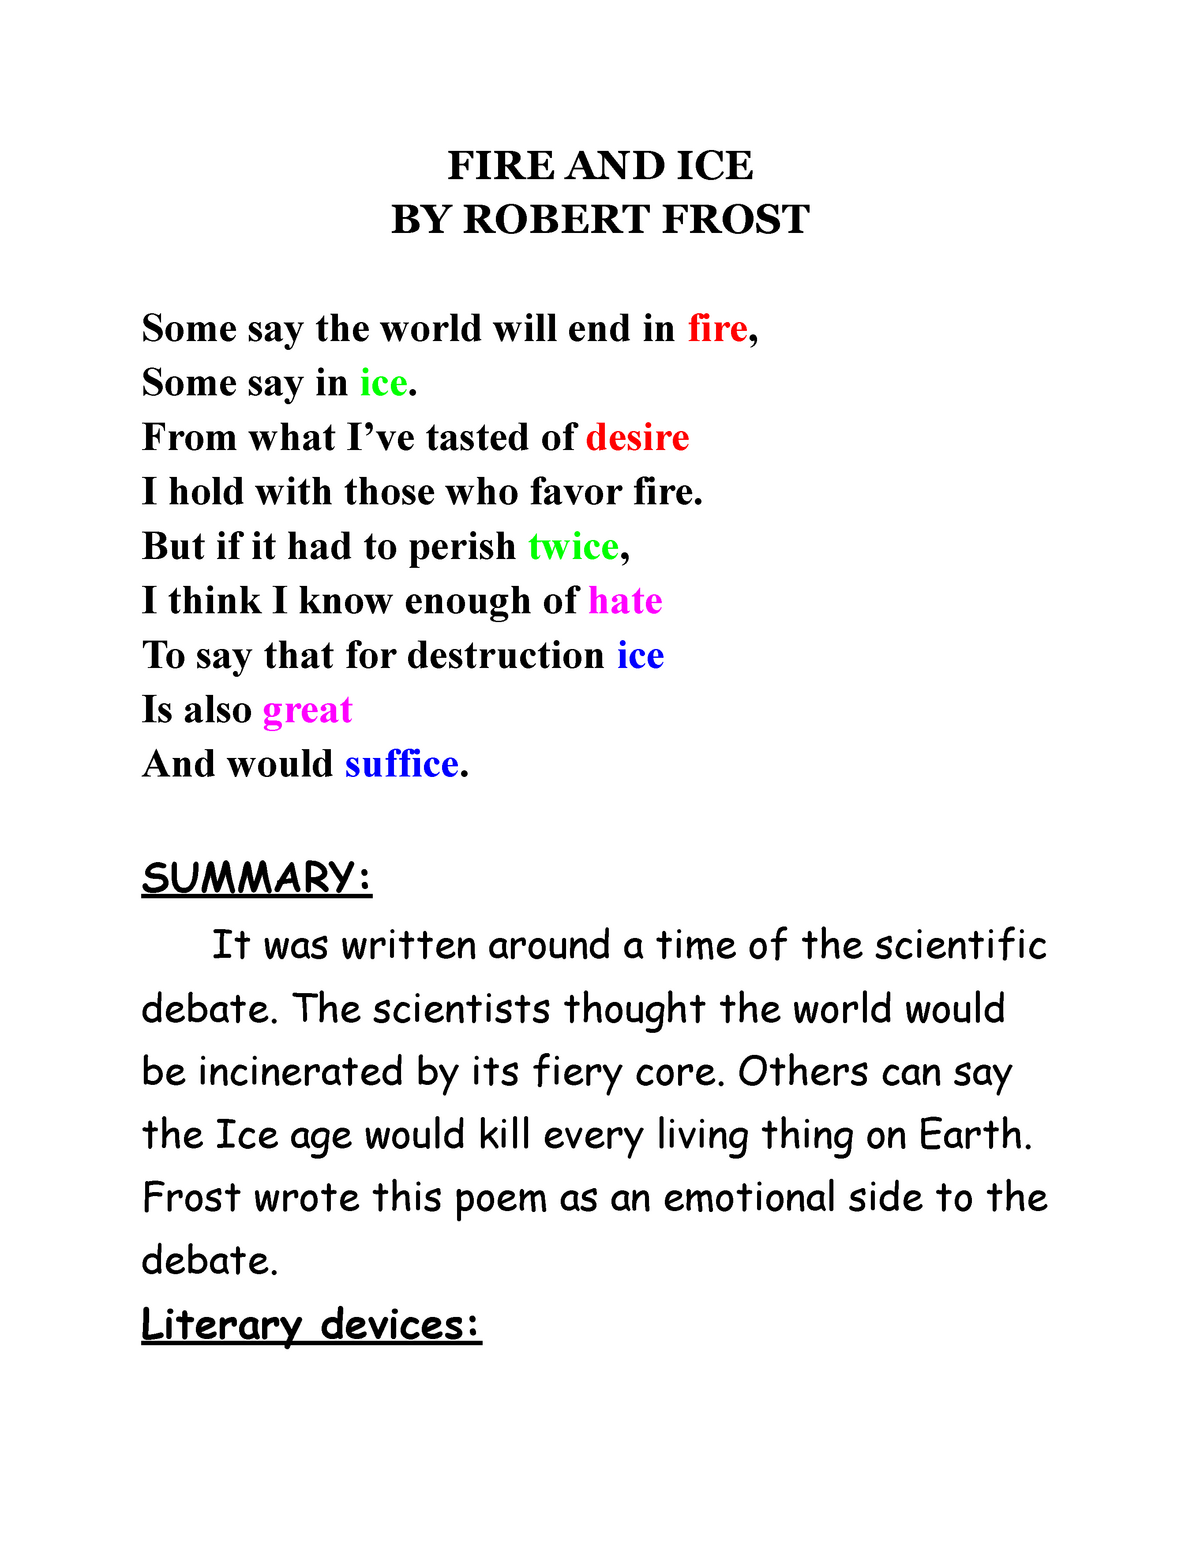 Fire And Ice - Summary Of Poem Fire And Ice - Fire And Ice By Robert Frost  Some Say The World Will - Studocu